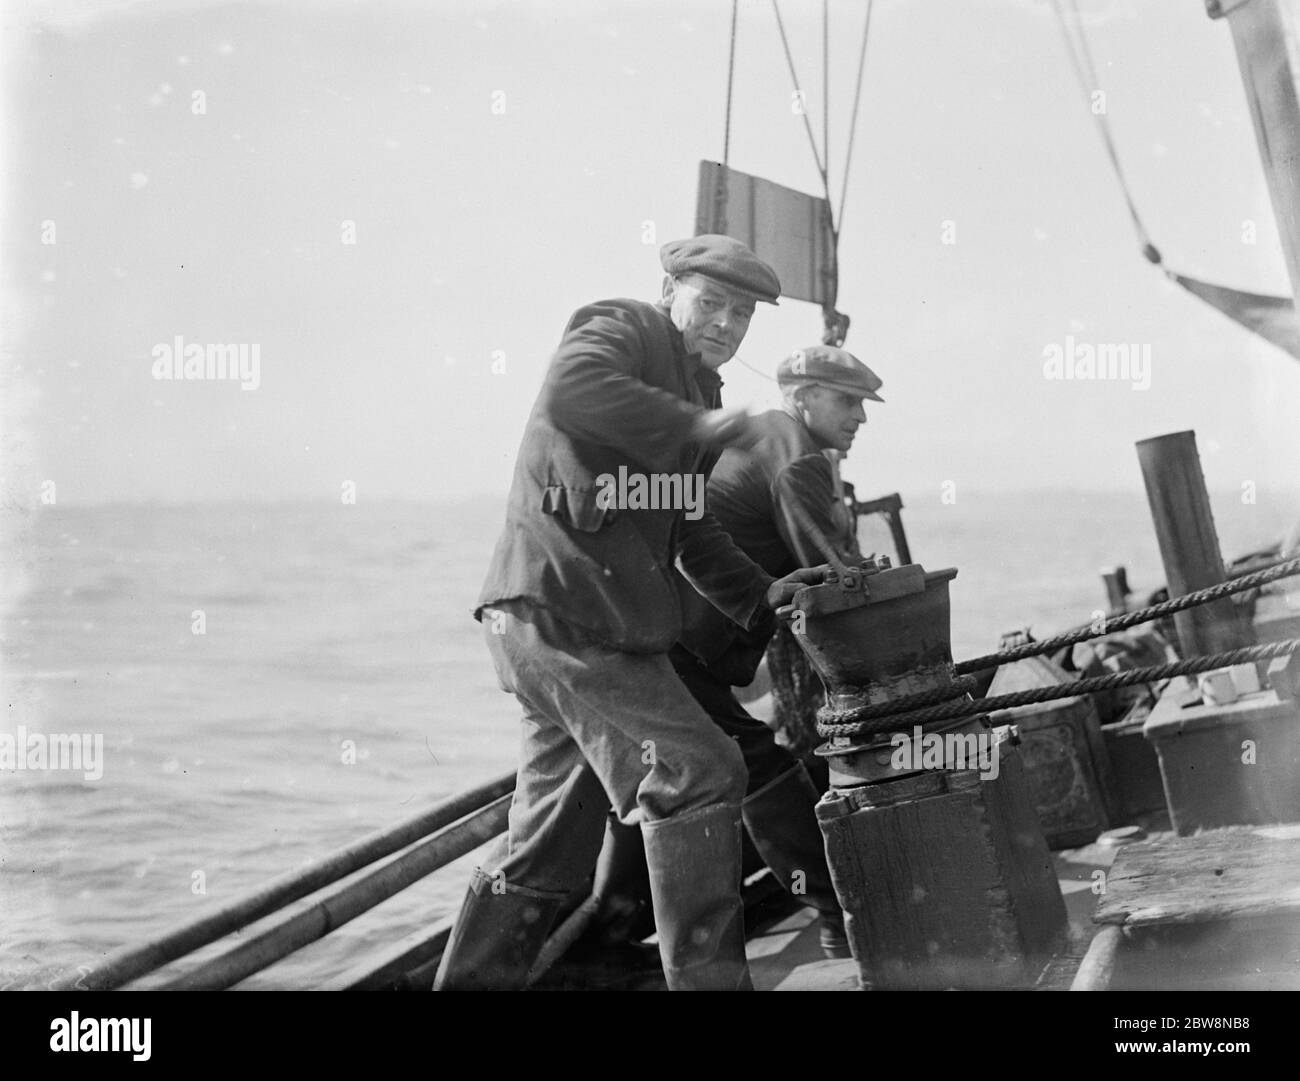 A crewman on a shrimper boat works the boom rope winch . 1936 Stock Photo